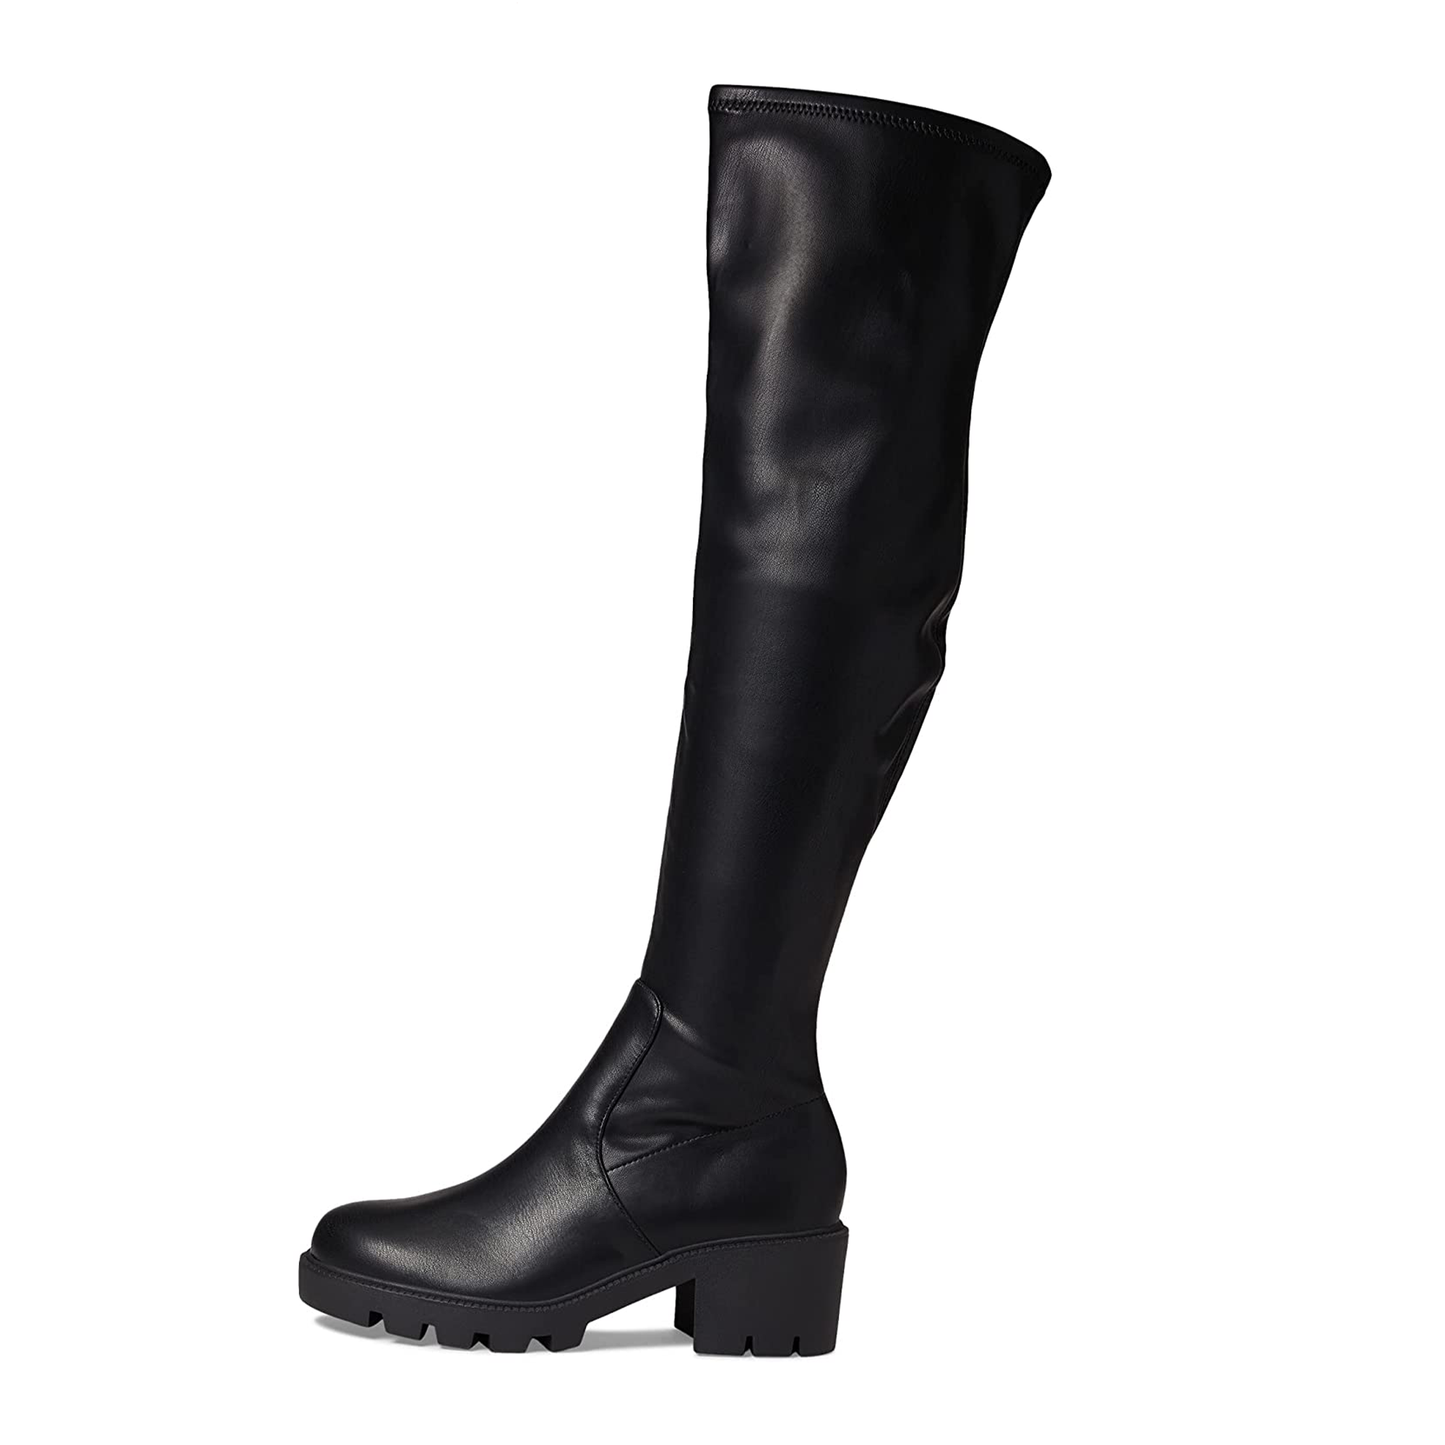 Stay on trend in these eye-catching over the knee boots! The lug sole makes a statement and is so versatile, they will go with any of your favorite dresses or skirts!